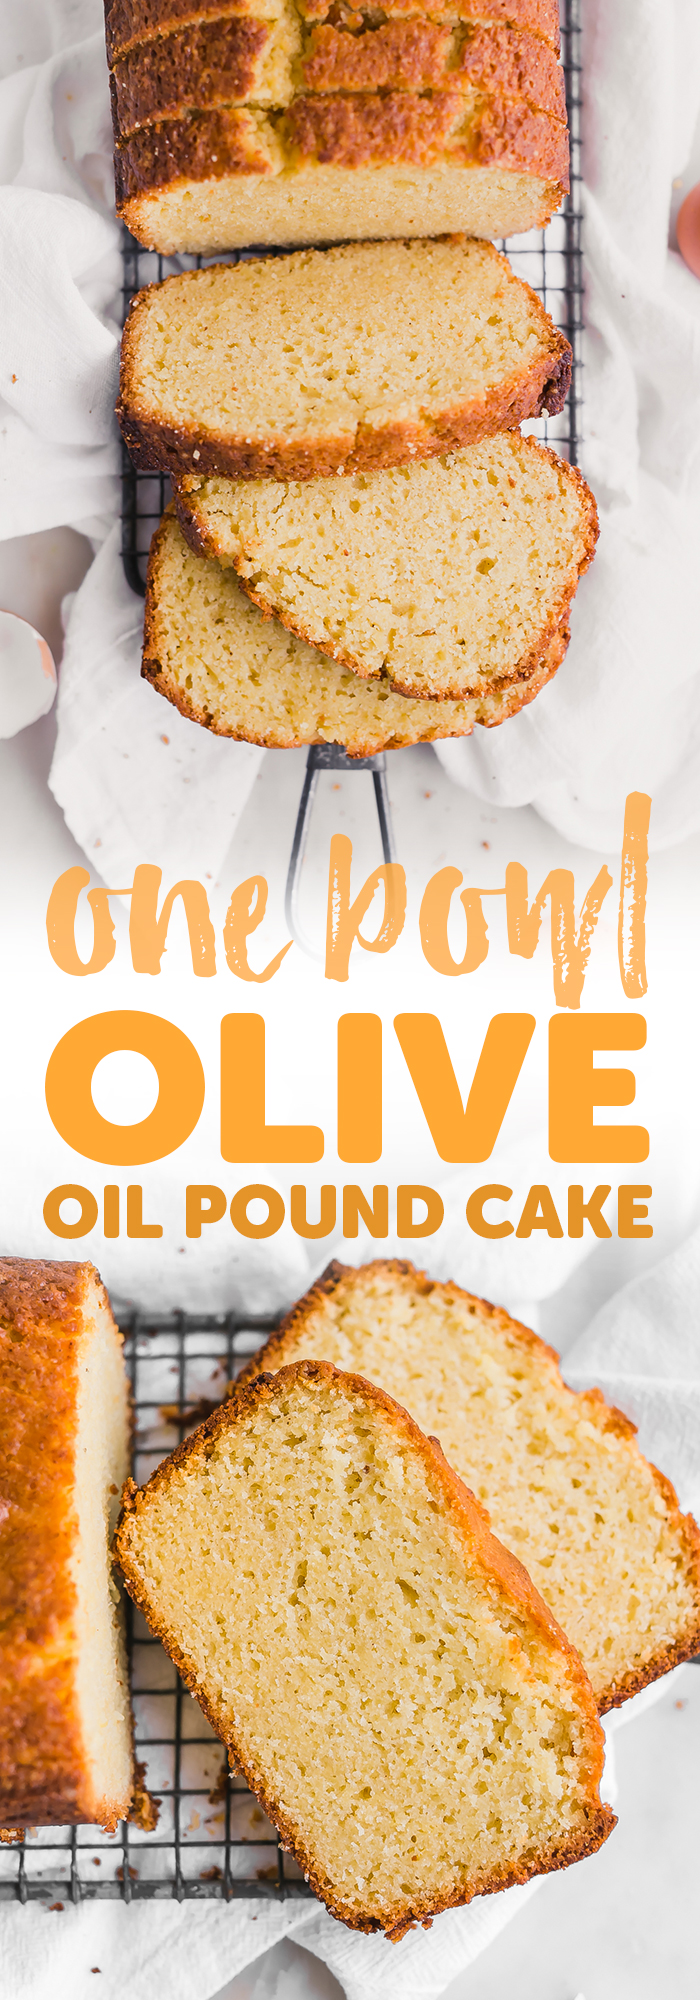 One Bowl Lemon Olive Oil Pound Cake - Learn how to make the easiest lemon olive oil pound cake in just one bowl! It takes 5 minutes to whisk together thats all! #oliveoilpoundcake #poundcake #lemonoliveoilpoundcake | Little Spice Jar